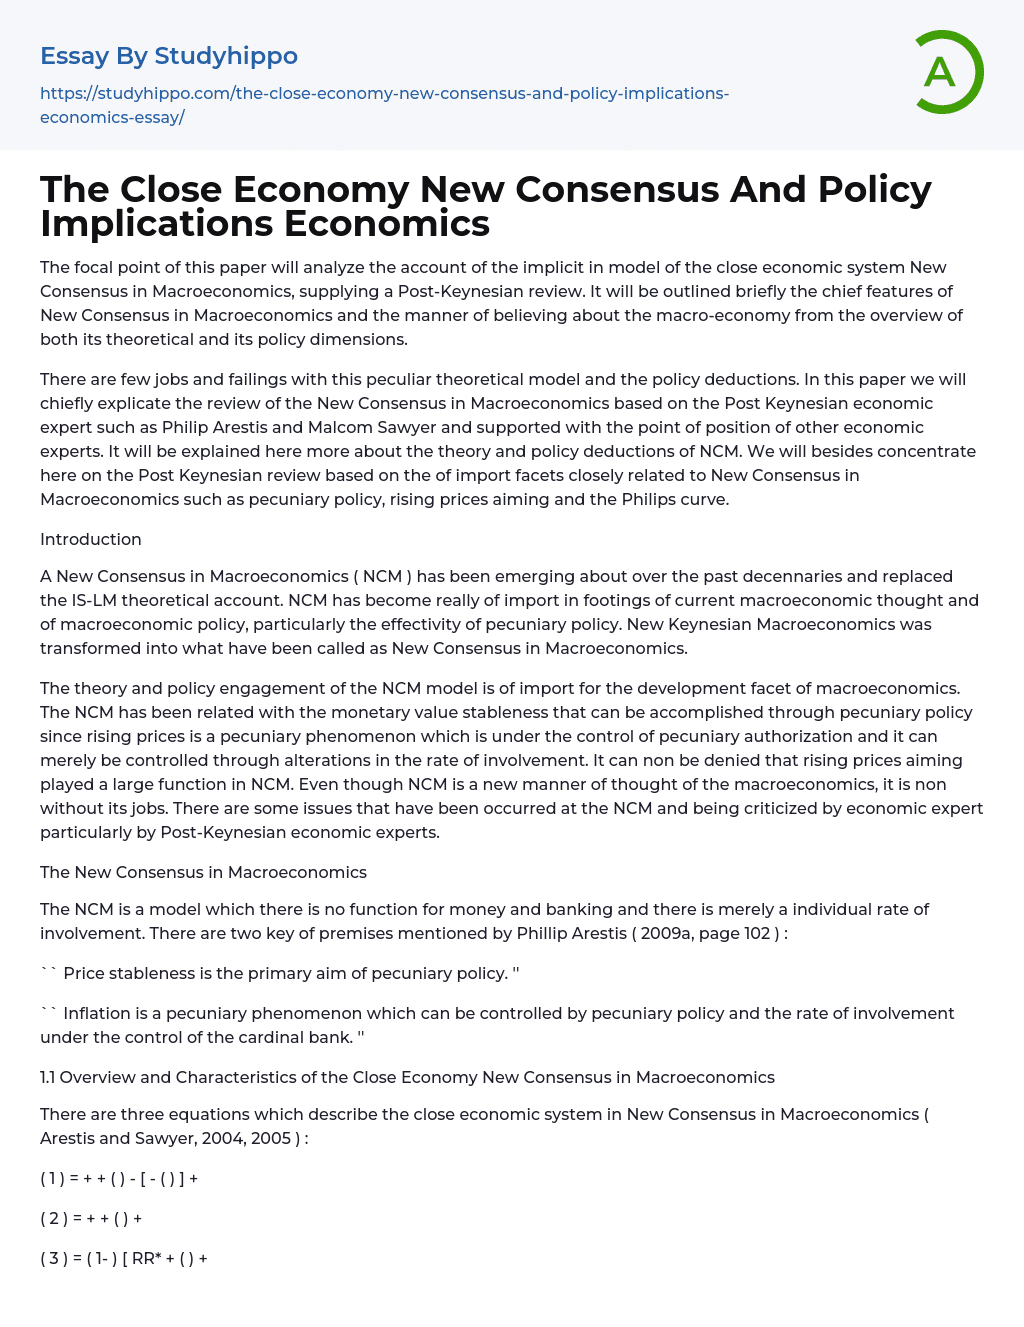 The Close Economy New Consensus And Policy Implications Economics Essay Example